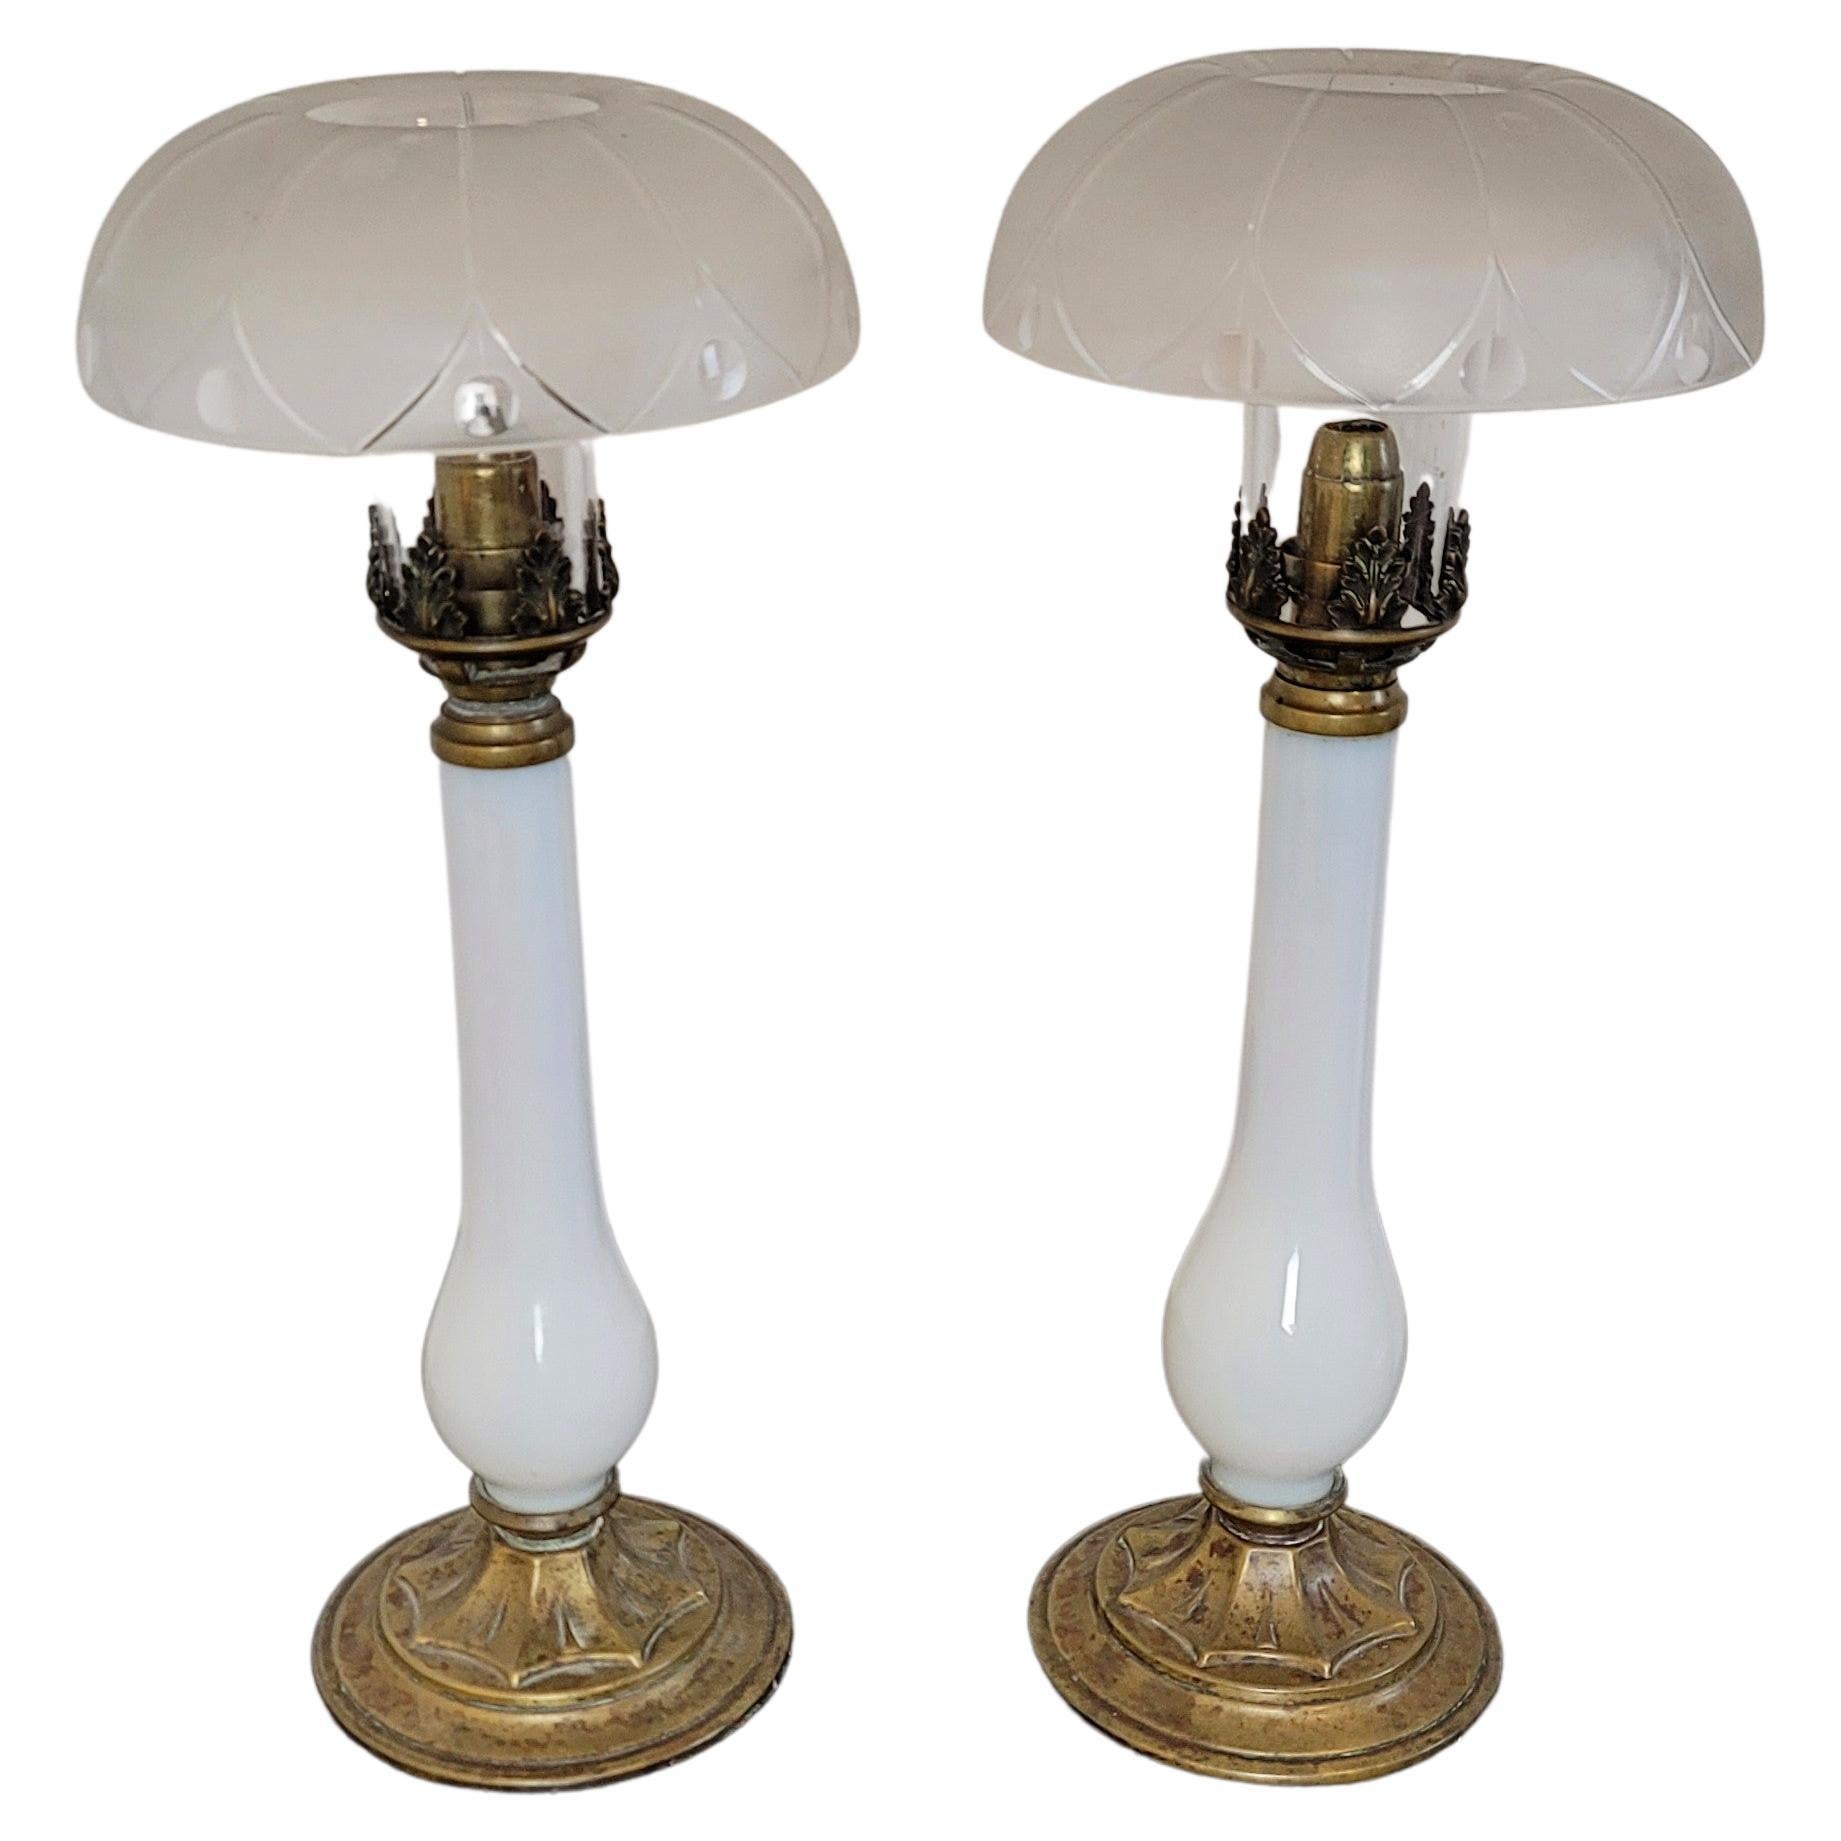 Scarce French Empire Period Opaline Glass Brass Candlestick Table Lamp Pair For Sale